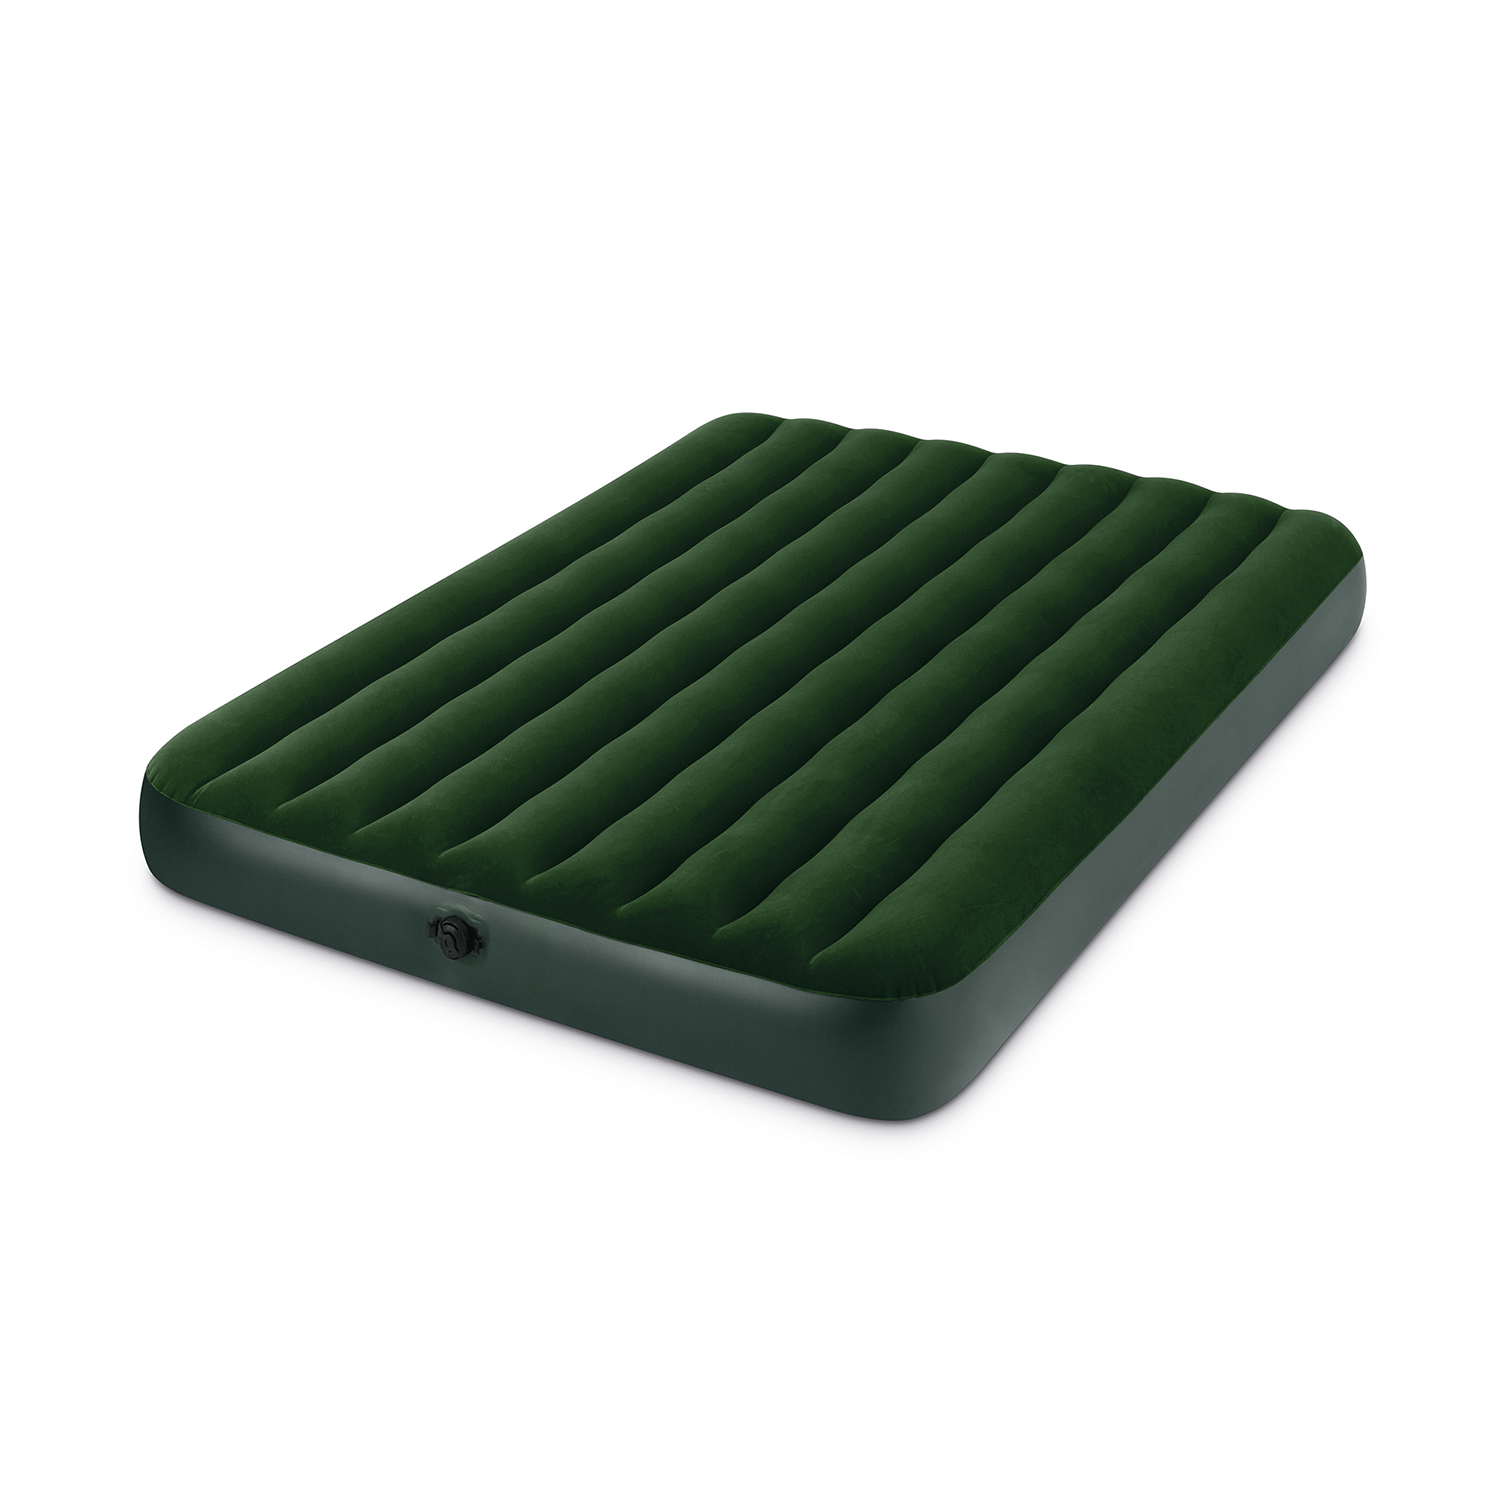 Intex 66969E Prestige Air Bed Outdoor Camping Downy Inflatable Mattress, Queen - image 1 of 8